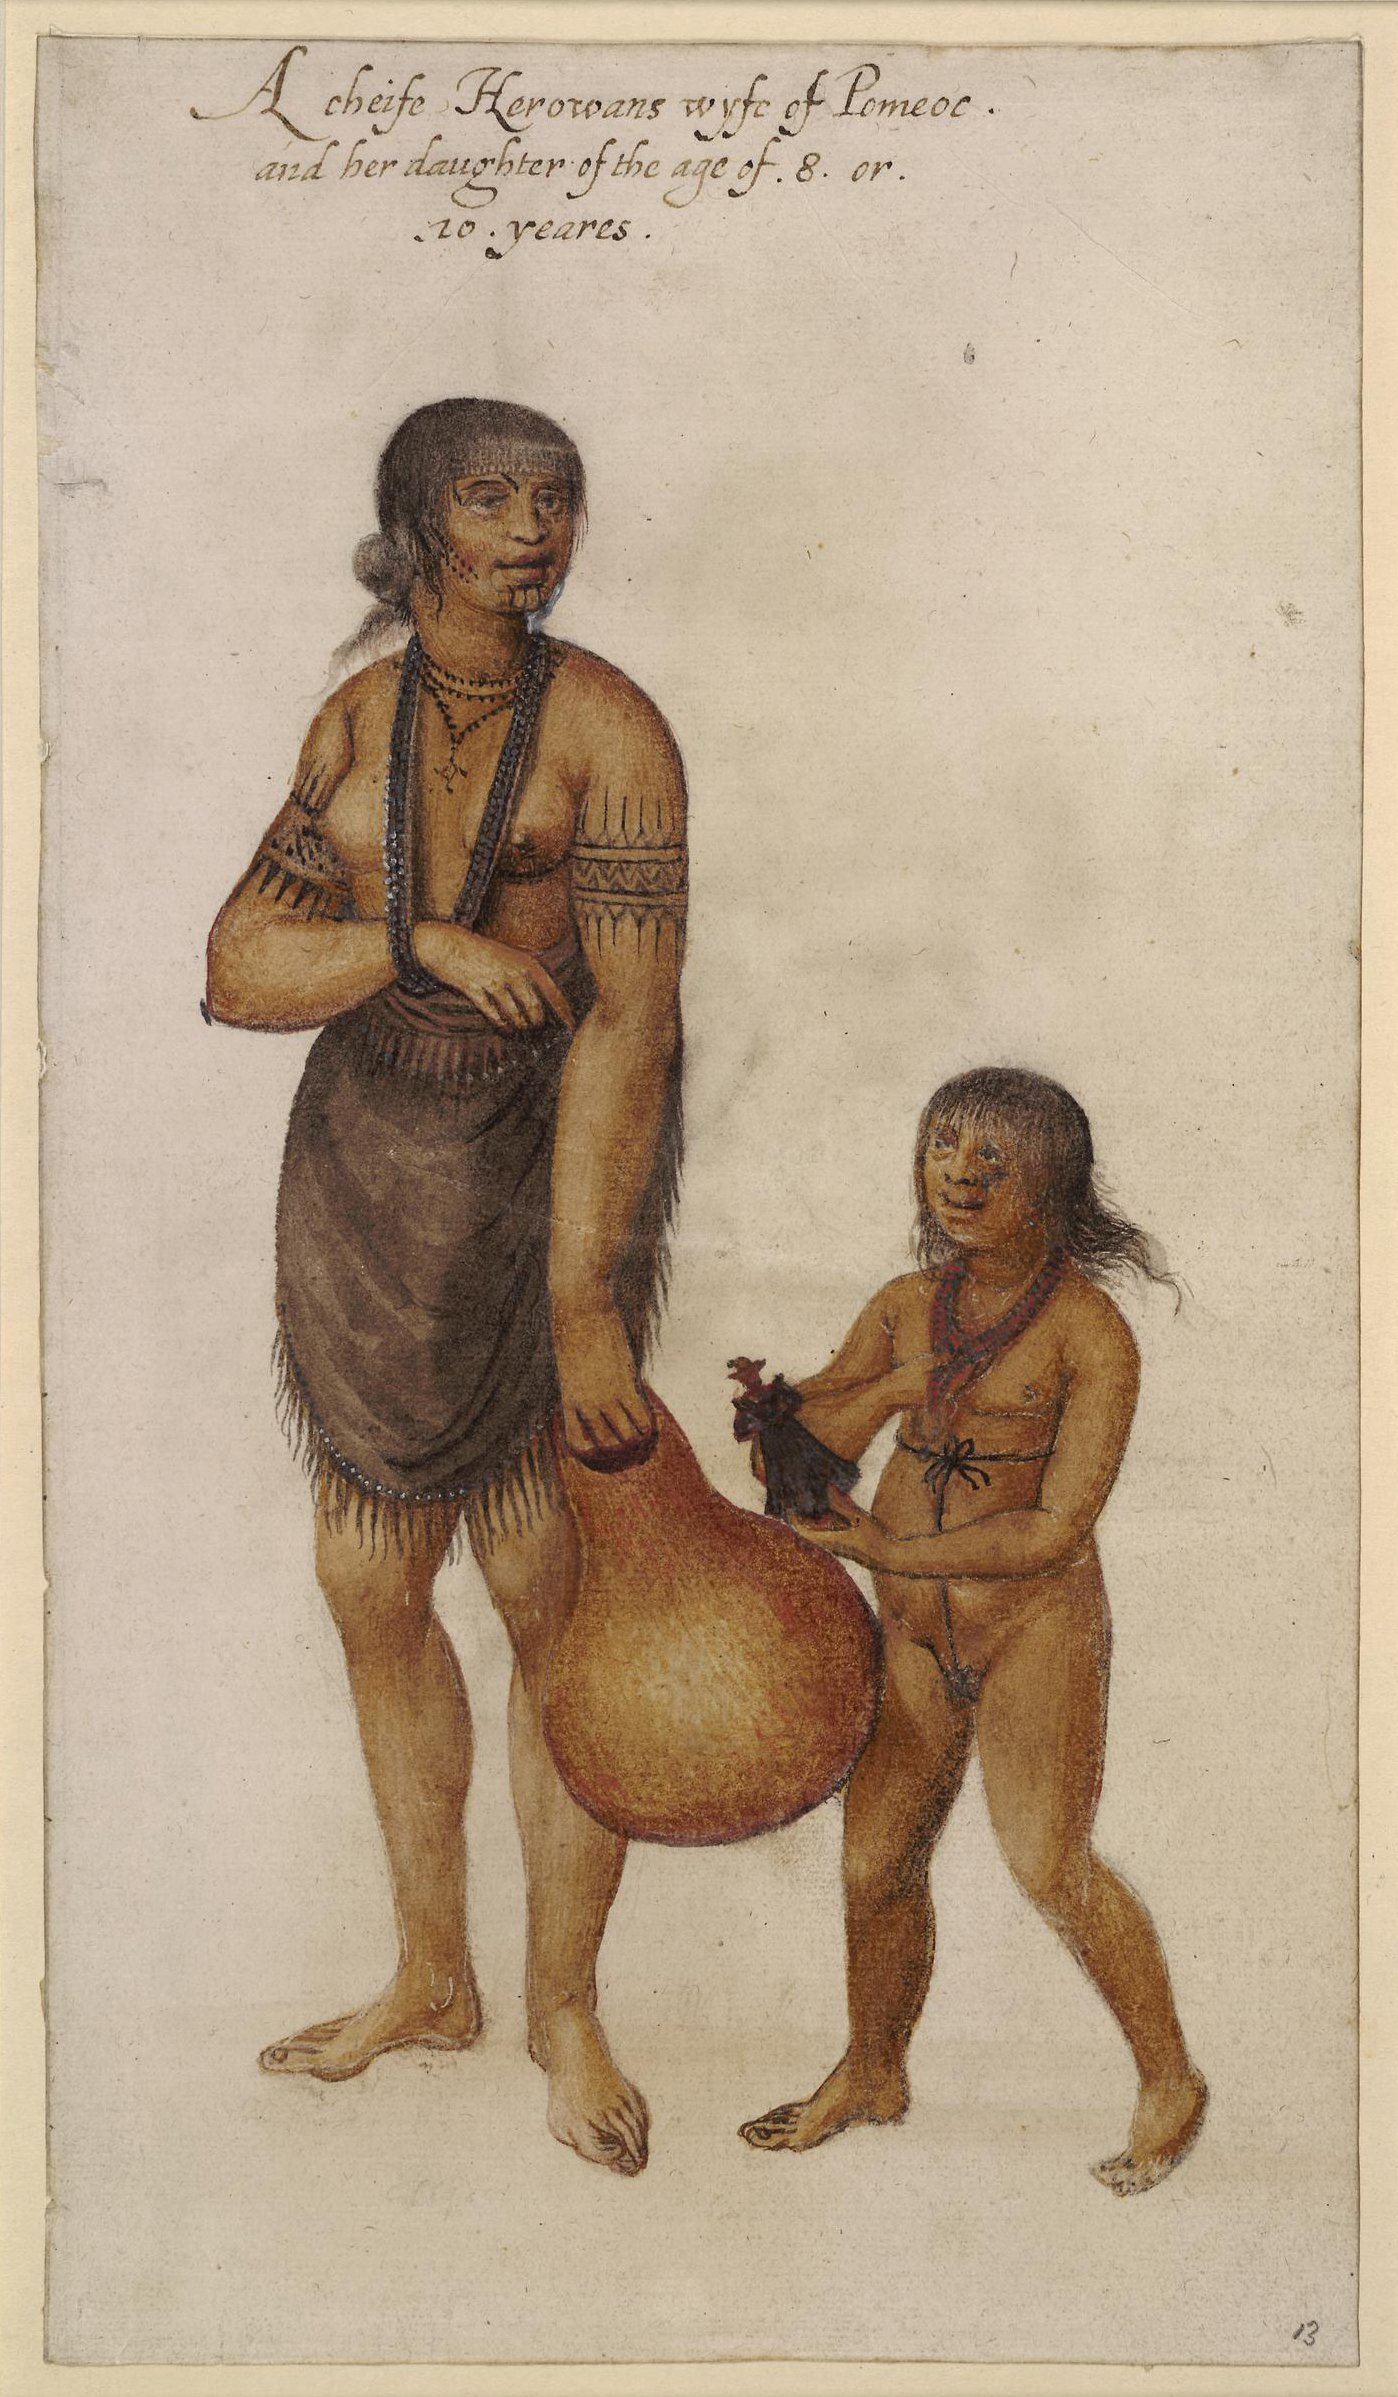 Wife of an Indian “Werowance” or chief of Pomeiooc and her daughter